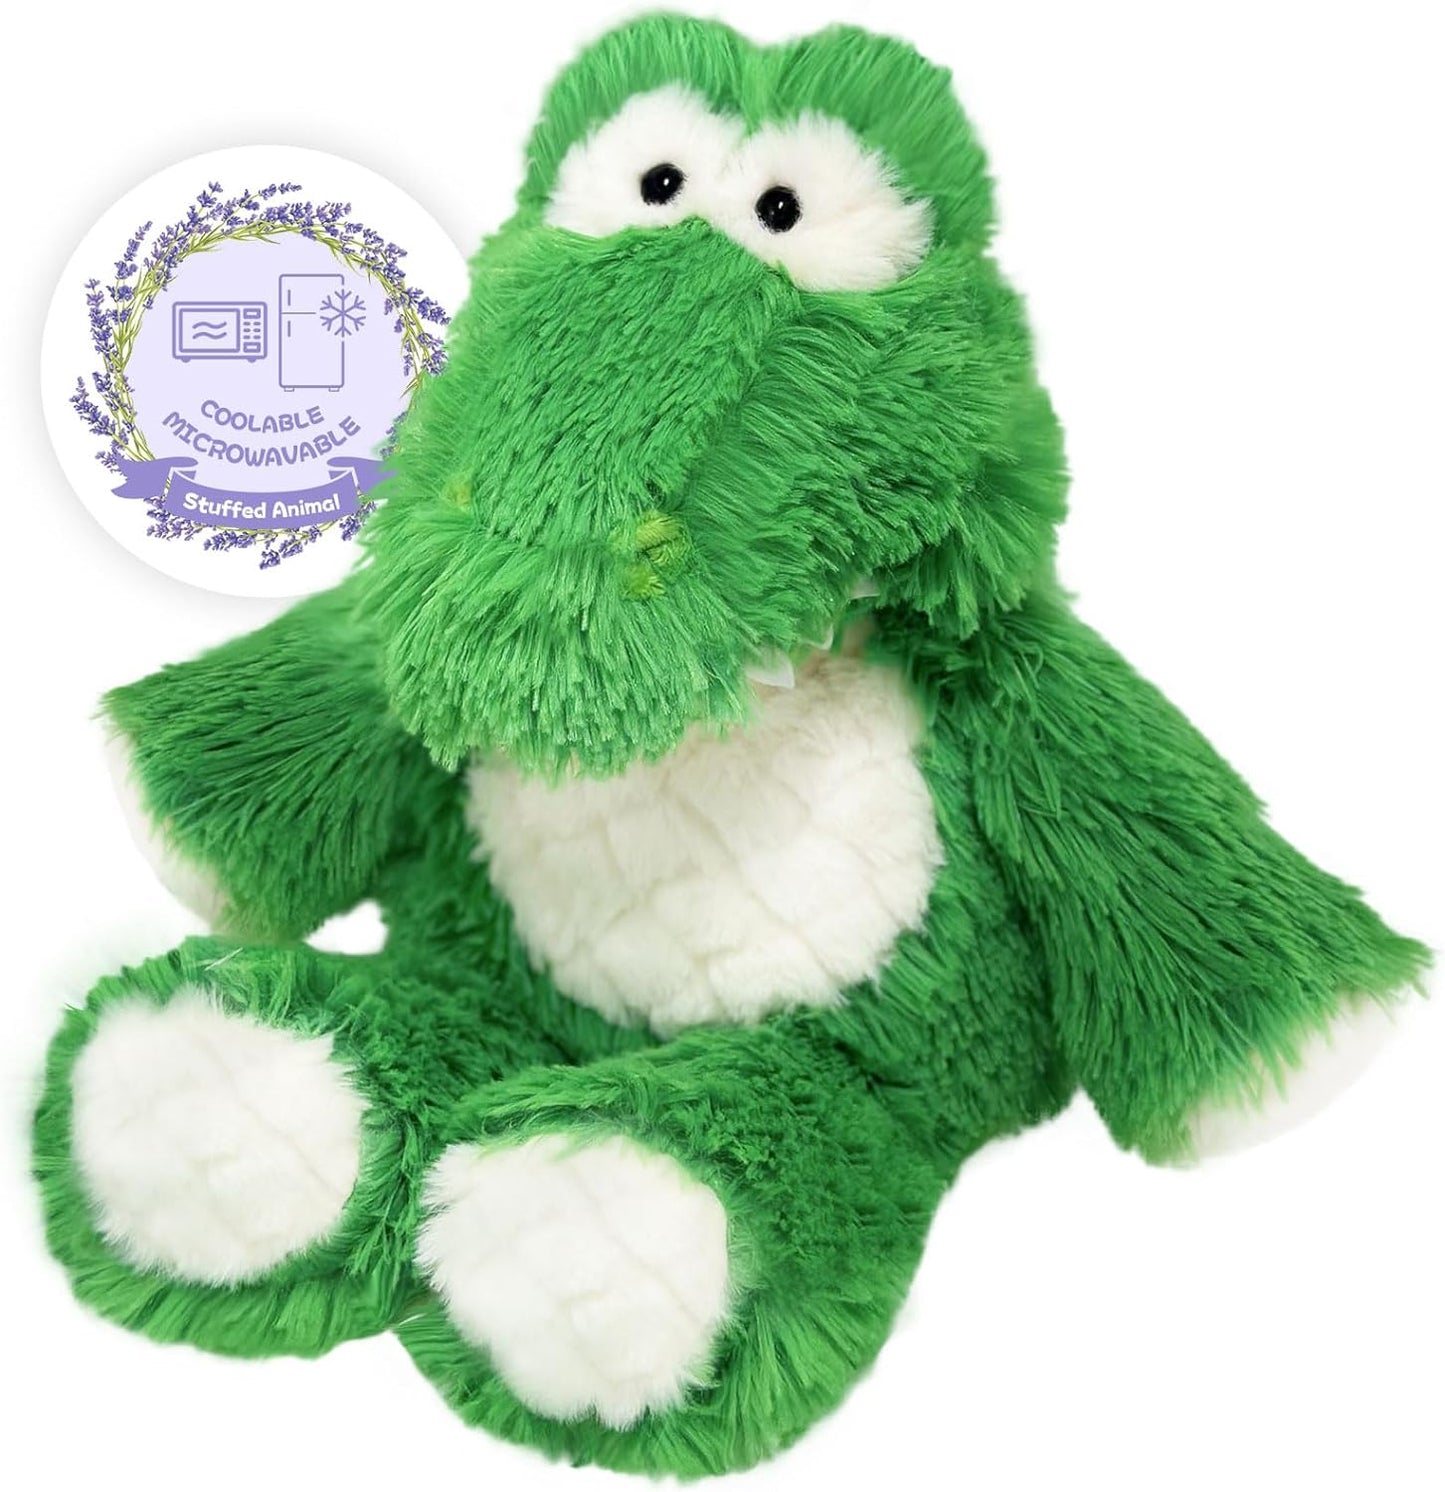 SuzziPals Warmable Alligator Stuffed Animal, Microwavable Stuffed Animal Heating Pads for Cramps and Pain Relief, Plush Crocodile Toy with Lavender Scent, Alligator Plushies for Anxiety Stress Relief